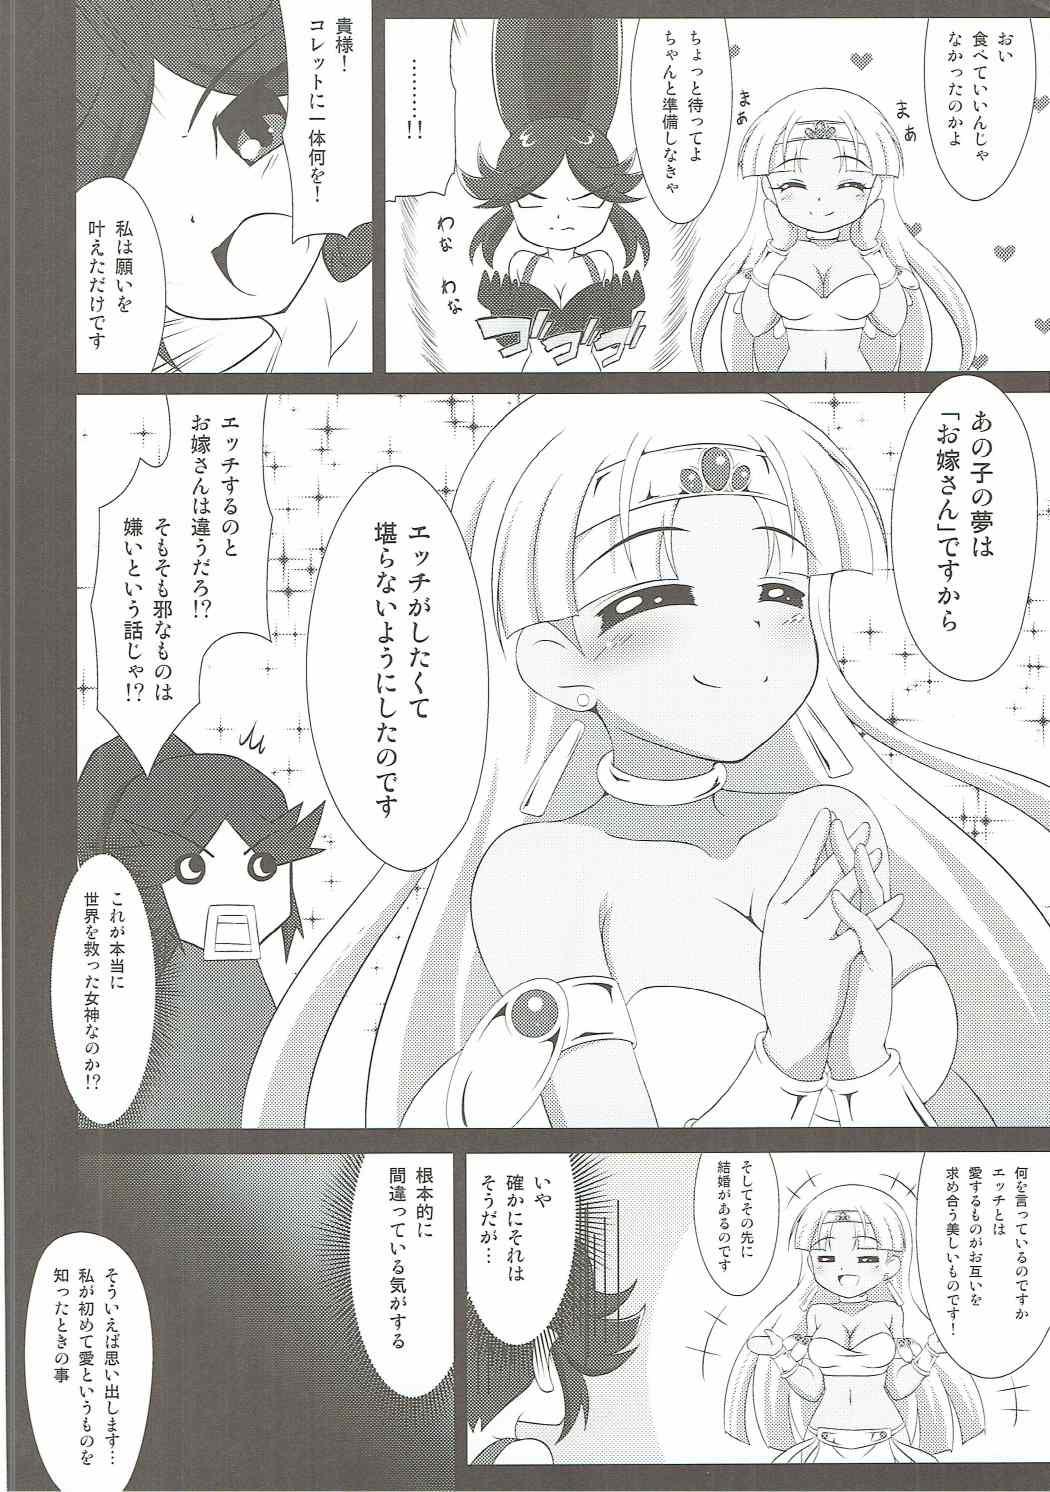 Married Claire to Hihou no Tobira - Hihouden Gaygroup - Page 9